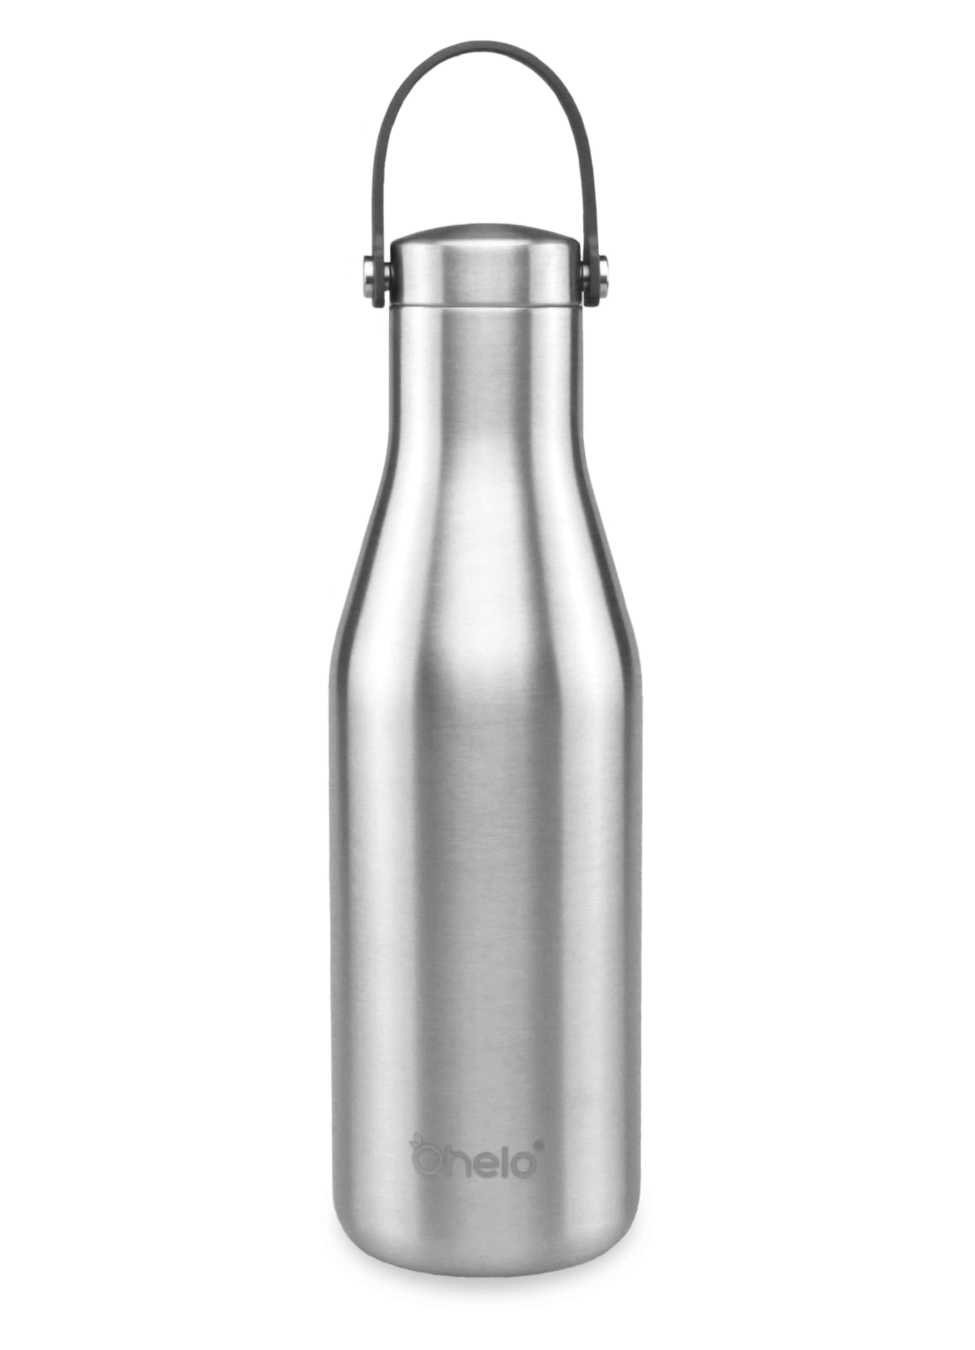 Ohelo stainless steel water bottle